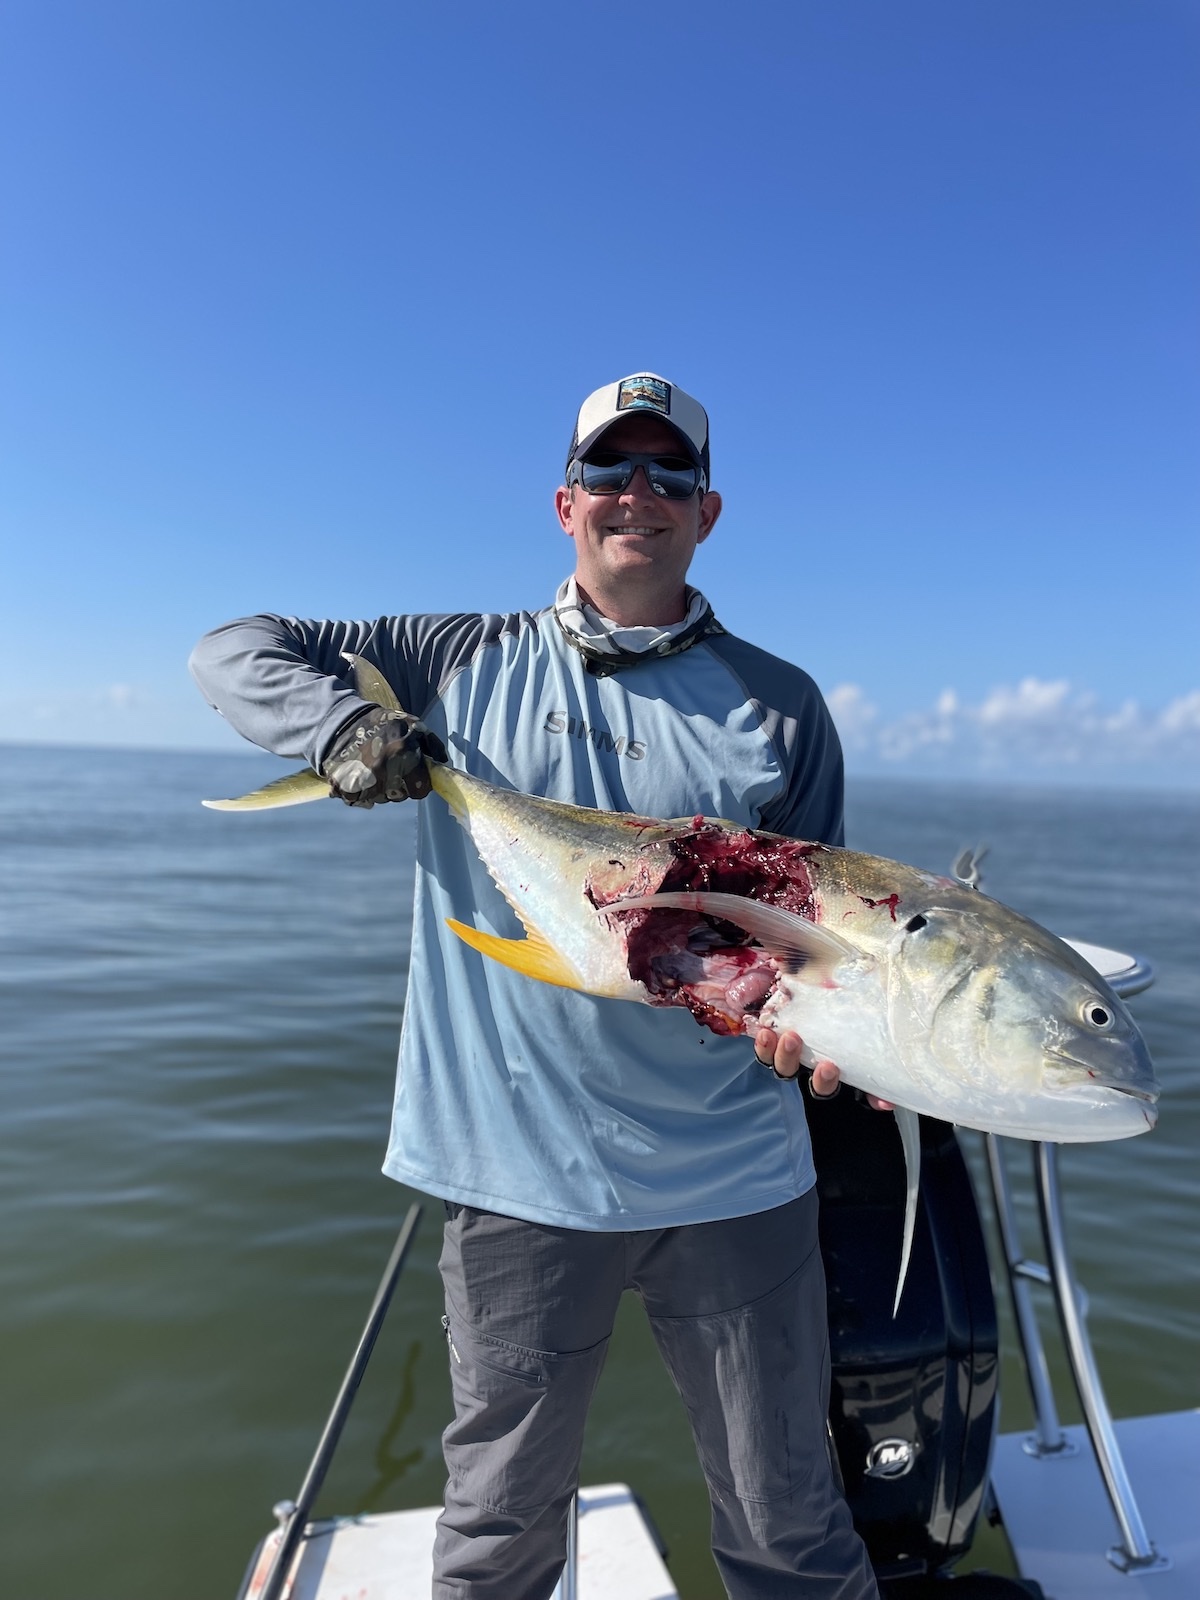 Crevalle jack caught on fly attacked by shark at side of boat